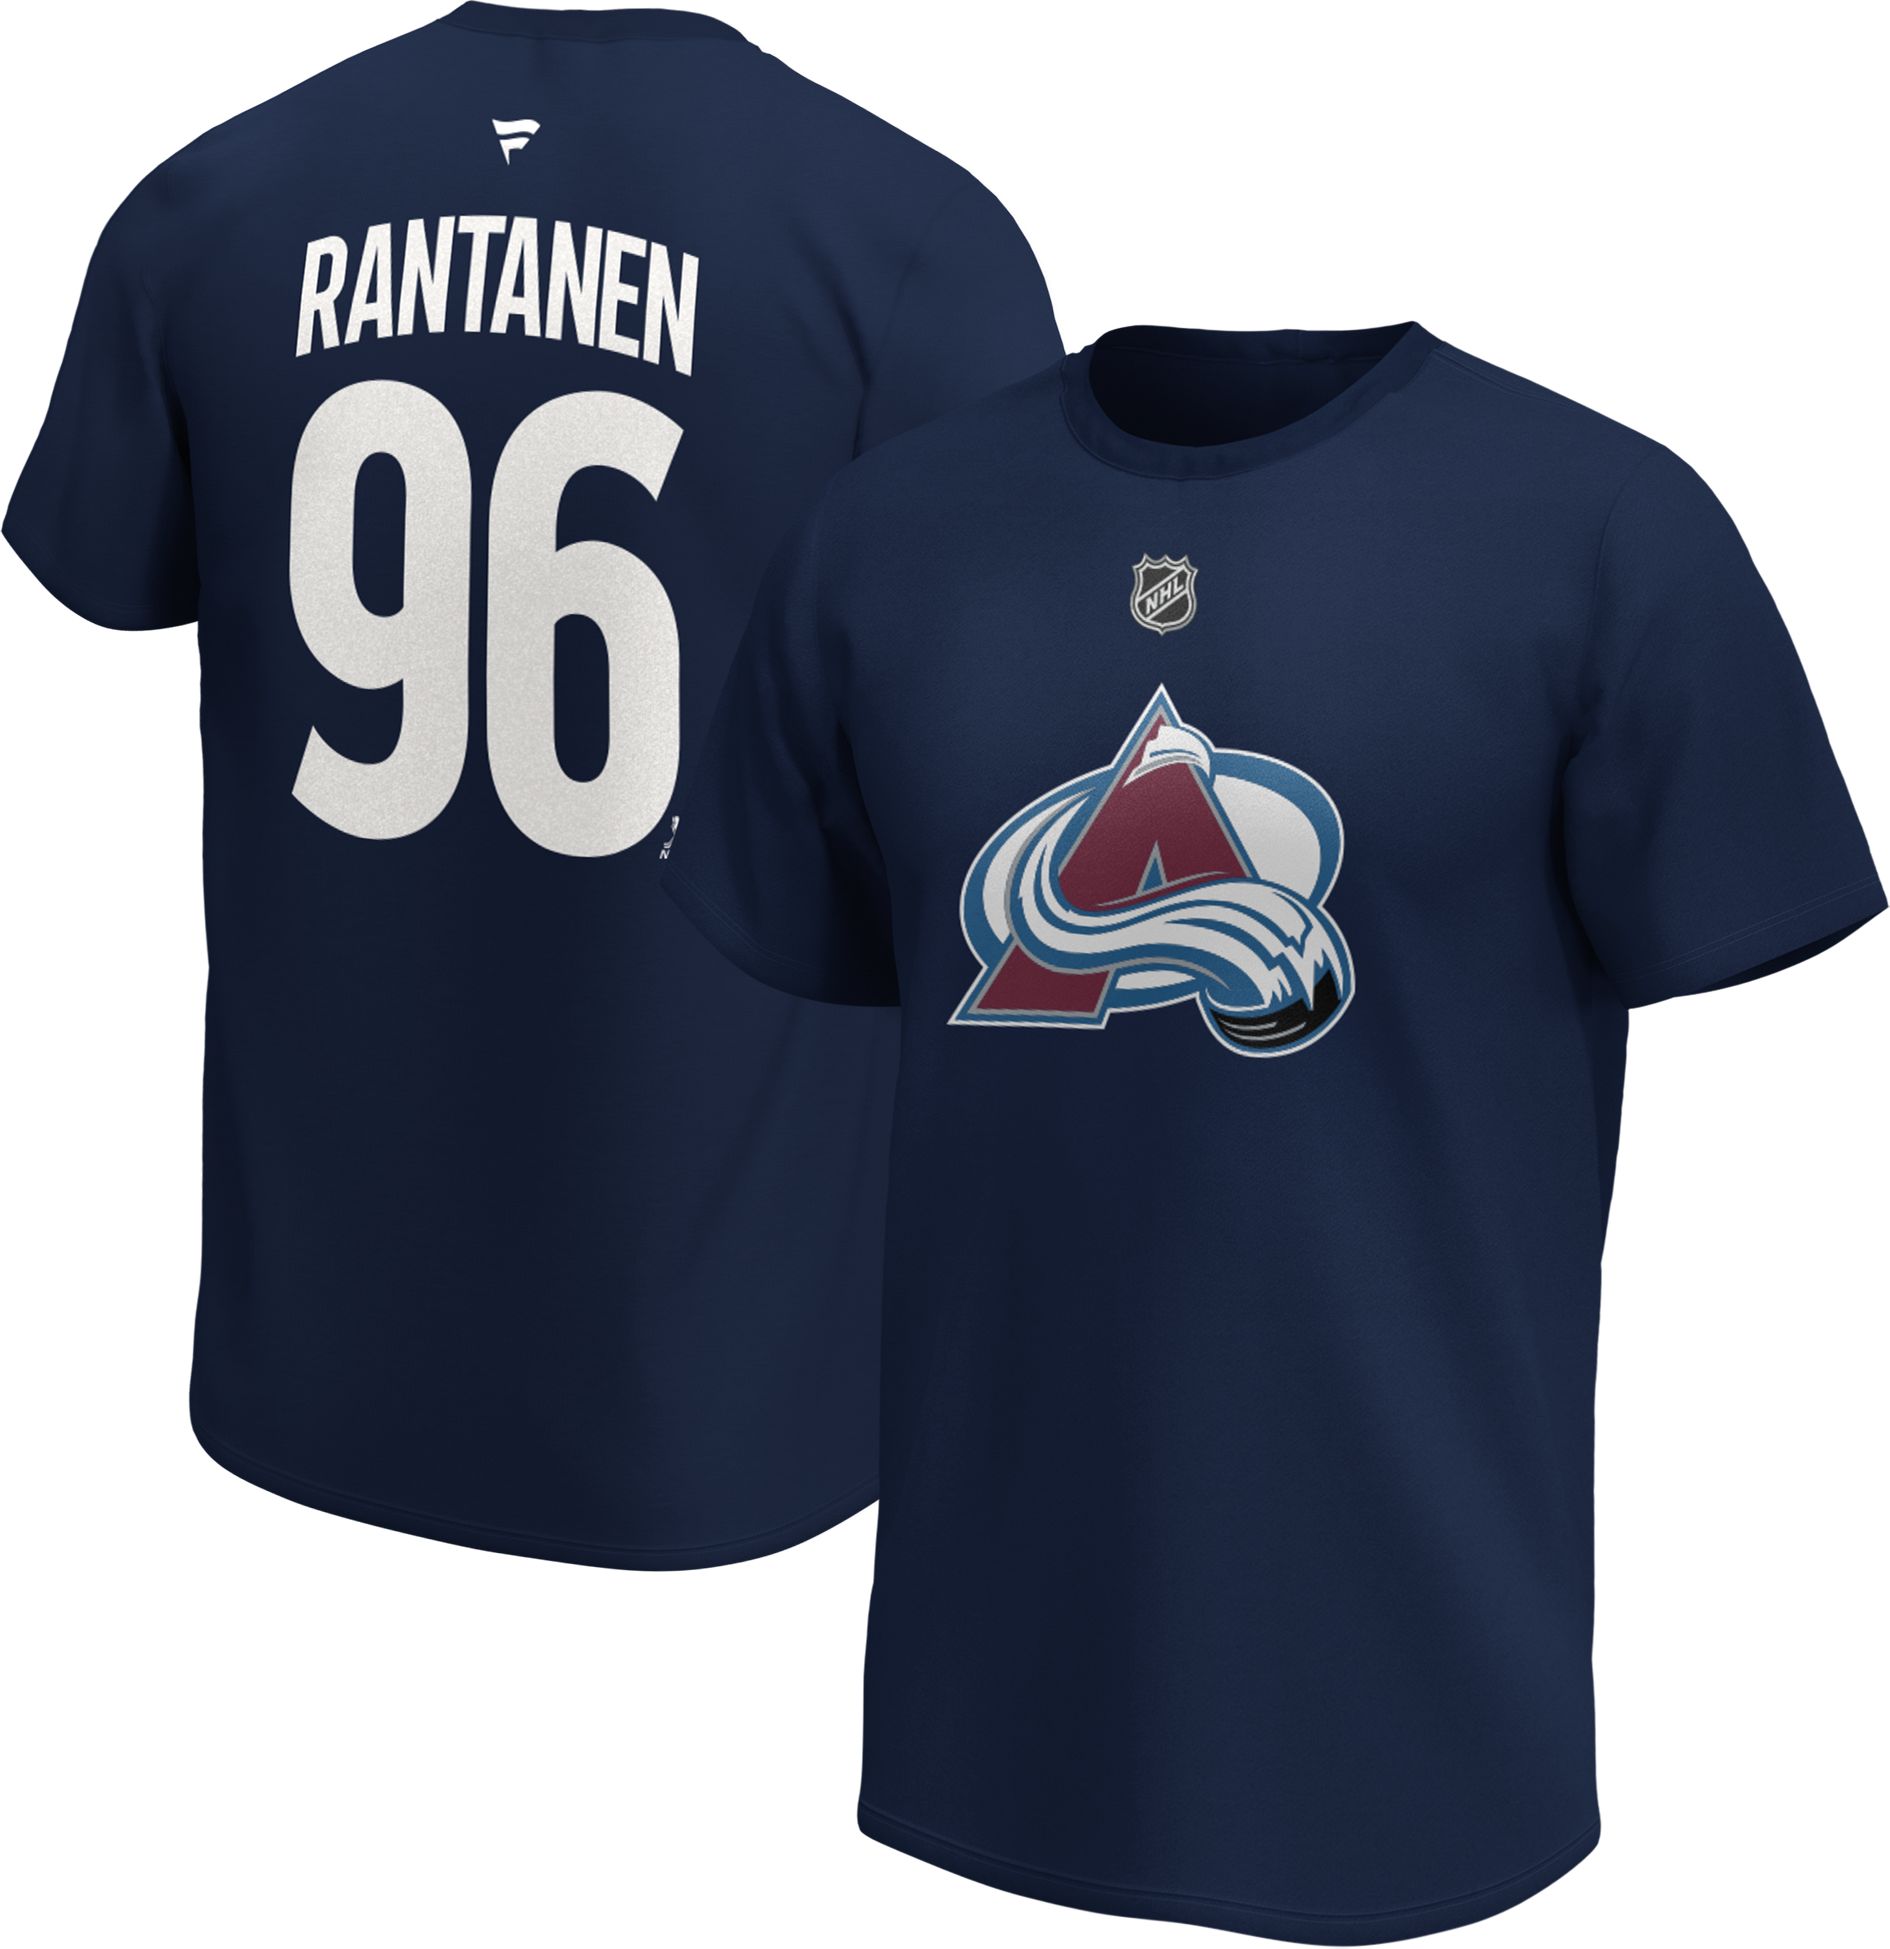 FANATICS, ICONIC NAME & NUMBER GRAPHIC T-SHIRT